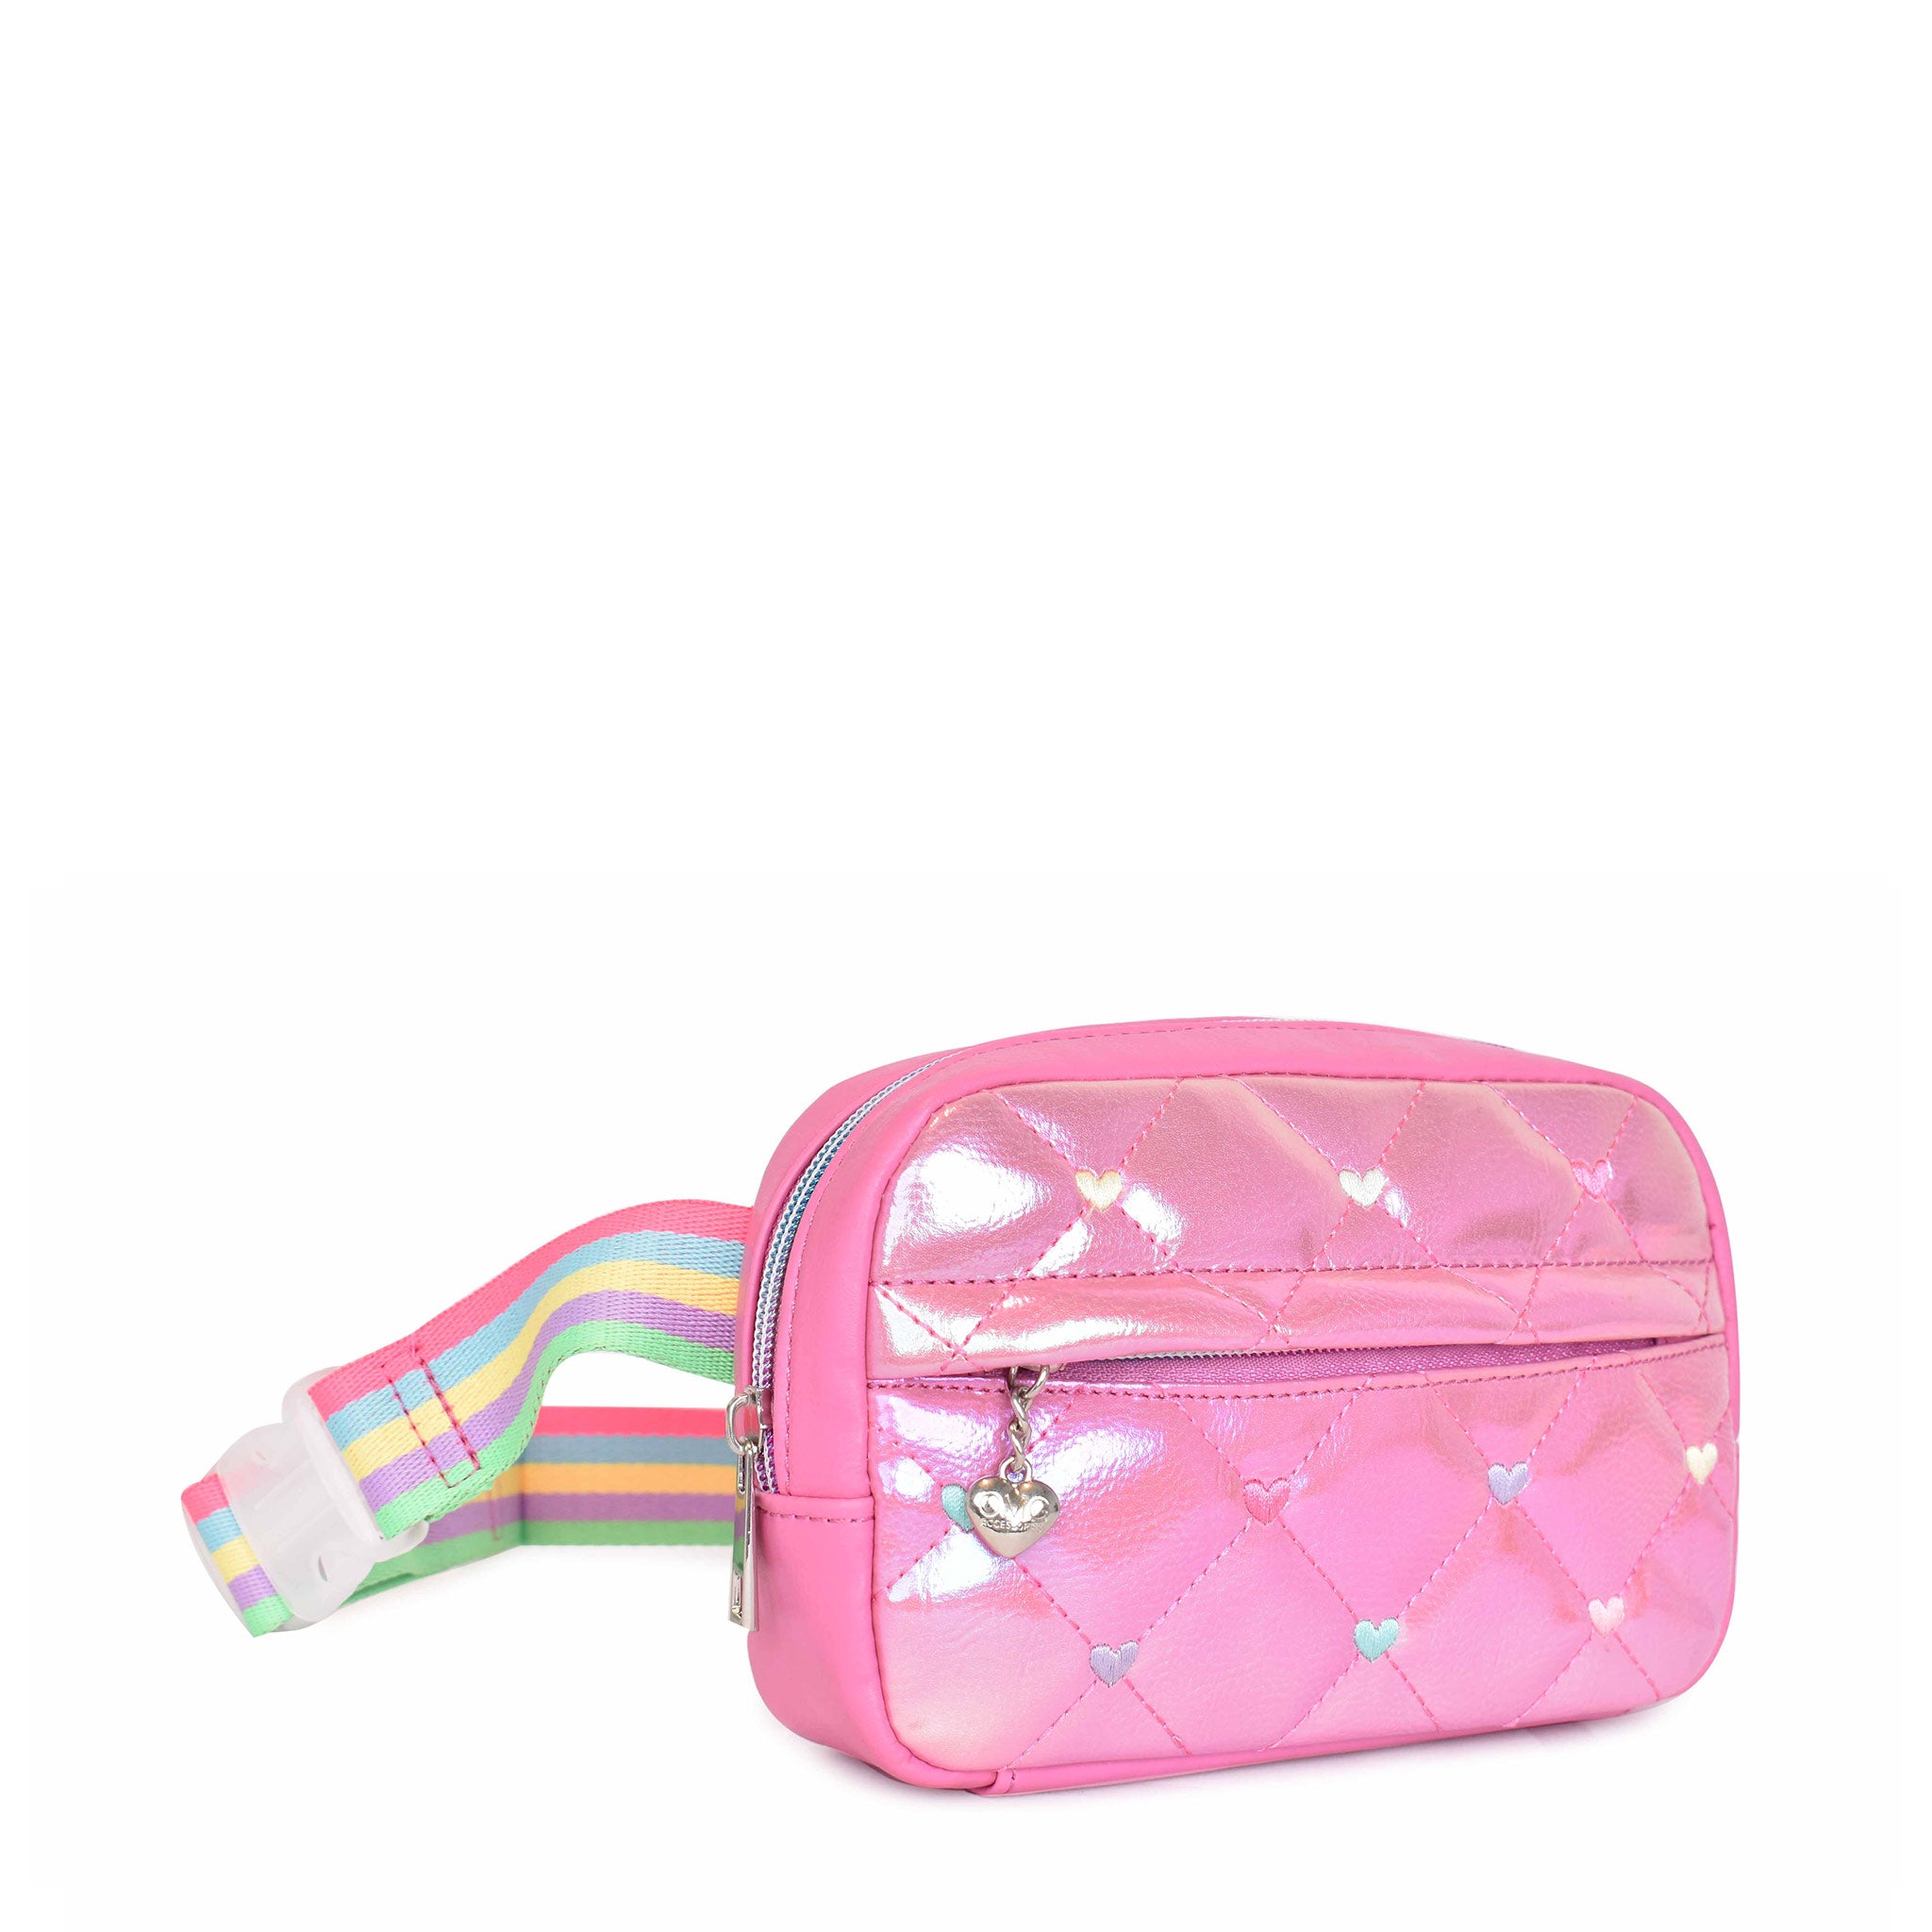 Side view of a metallic quilted hearts fanny pack with front zipper compartment